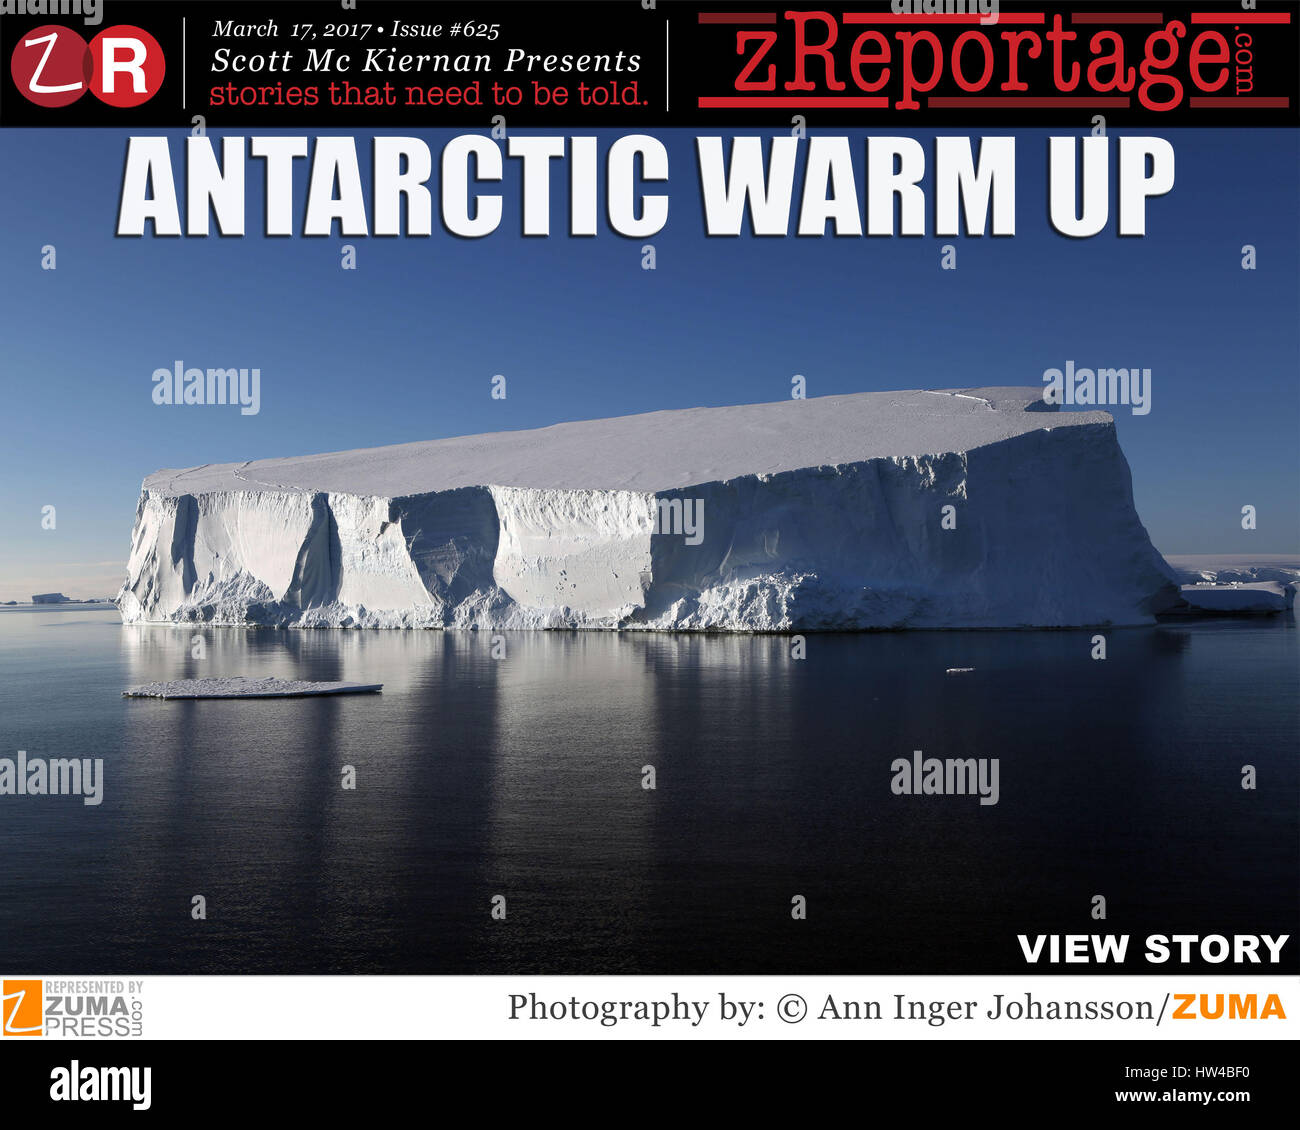 zReportage.com Story of the Week # 625 - Researchers record the hottest ever reading on Earth's coldest continent where temperatures usually range between 14F and -76F. Temperatures in Antarctica reached an unprecedented 63.5F on March 24, 2015, the U.N. weather agency has announced, March 2017. Over the past 50 years, the west coast of the Antarctic Peninsula has been one of the most rapidly warming parts of the planet, with its glaciers in accelerated retreat in the last 12 years. Air temperature increases of 3 degrees in the Antarctic Peninsula, which is 5 times the mean rate of global warm Stock Photo